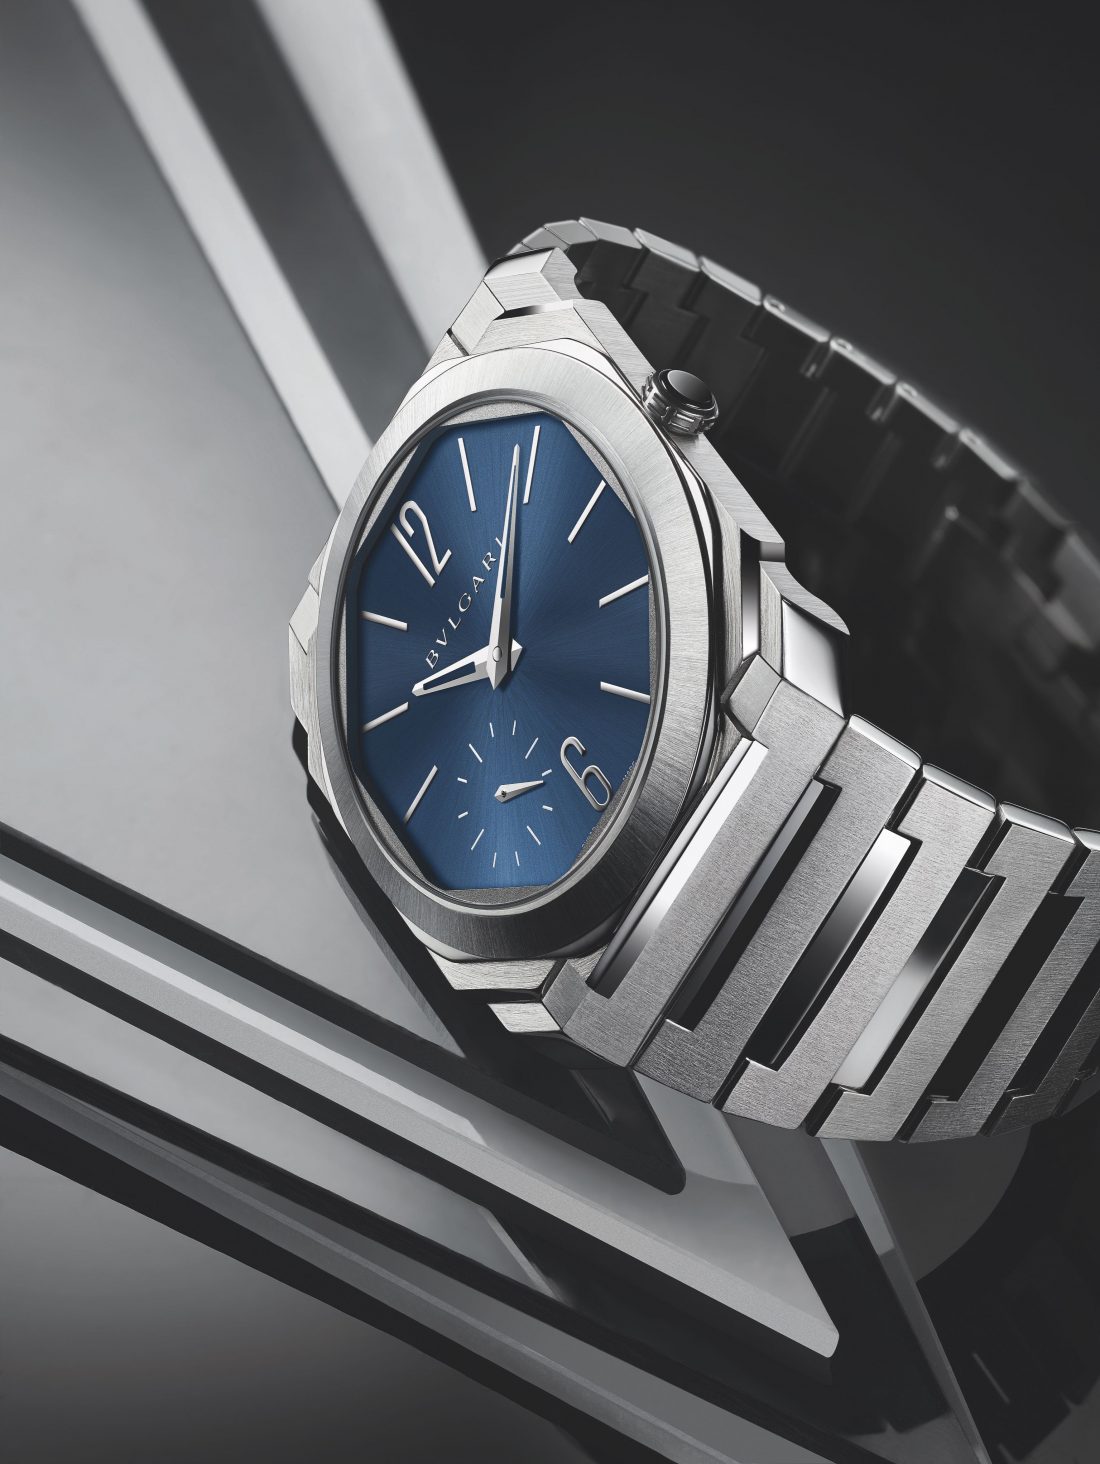 Luxury can be versatile too, the new Bulgari Octo Finissimo S proves it